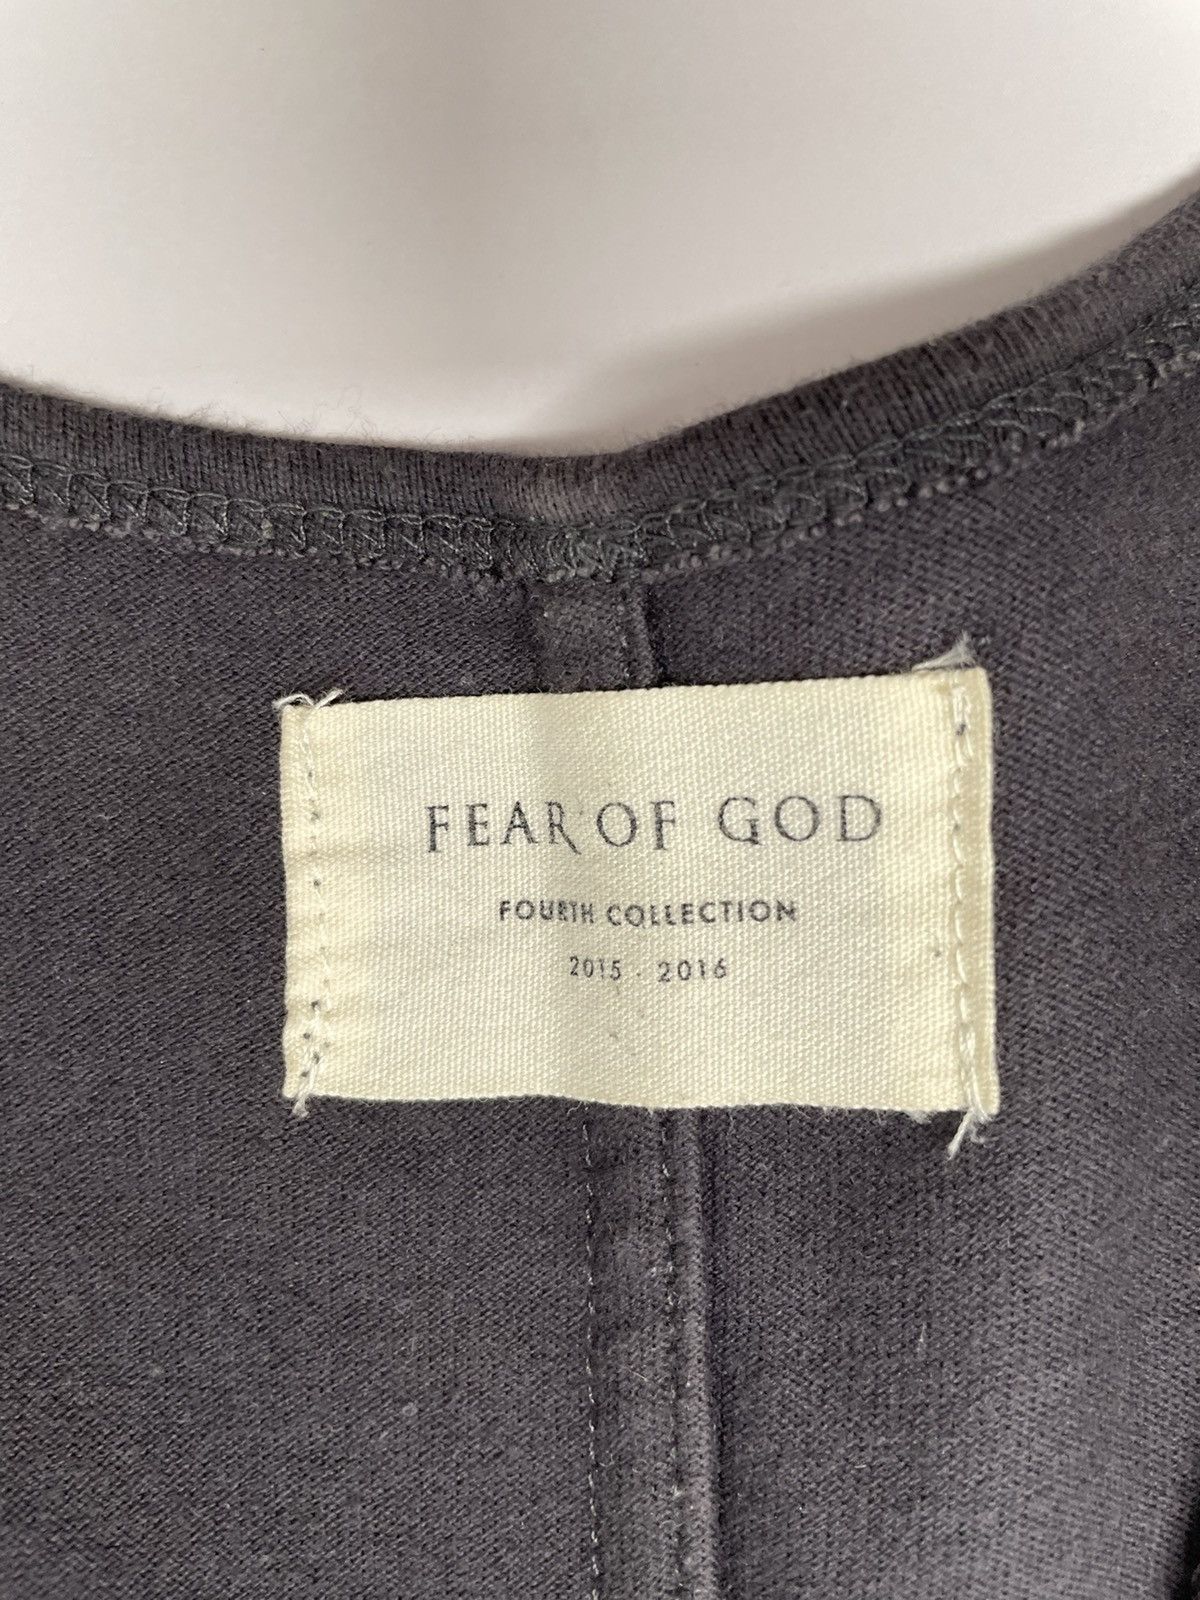 Fear of God 4th Collection Tank | Grailed